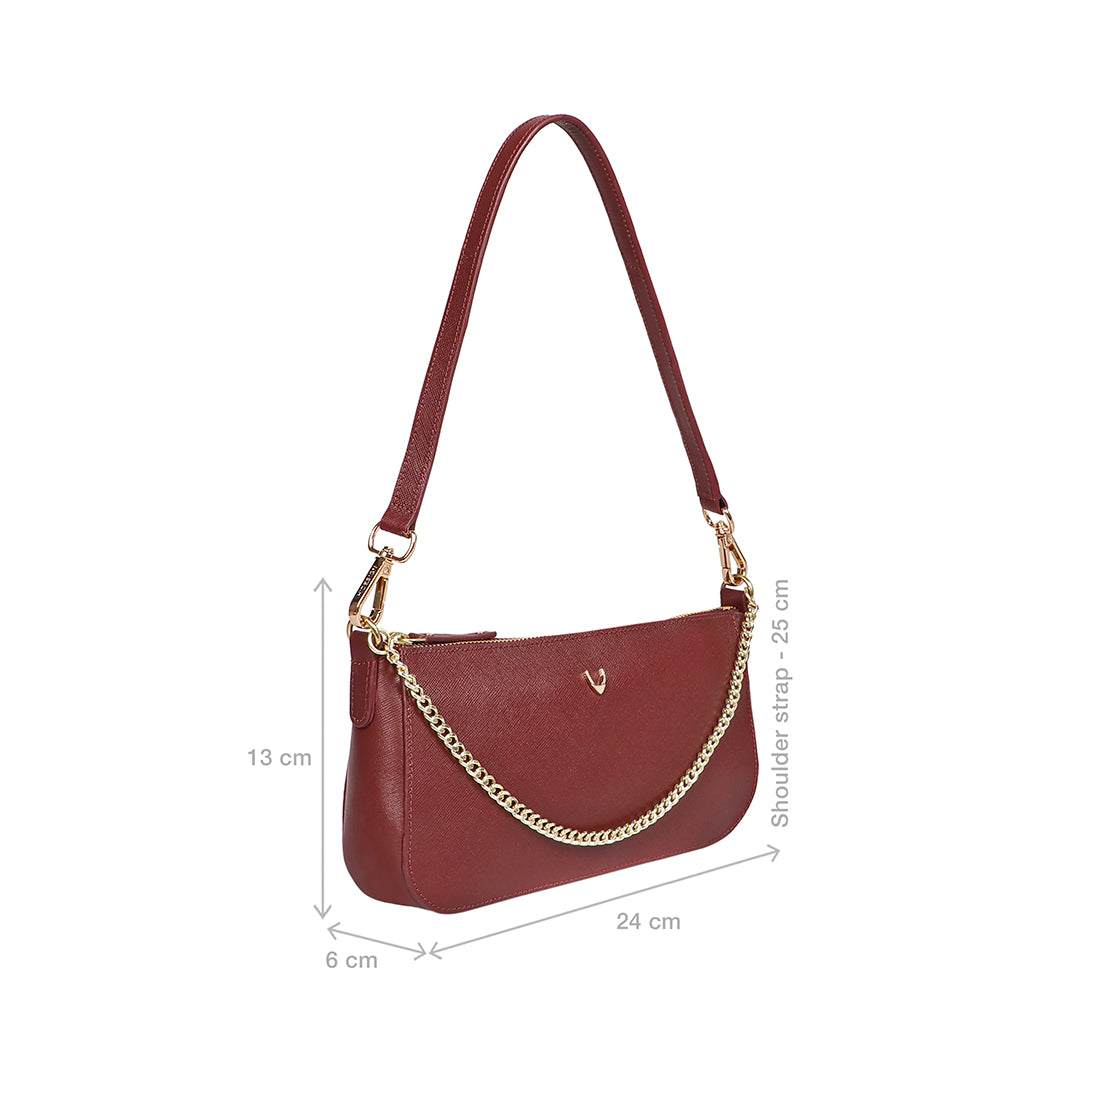 swiss polo 2 in 1 ladies purse - Buy swiss polo 2 in 1 ladies purse at Best  Price in Malaysia | h5.lazada.com.my